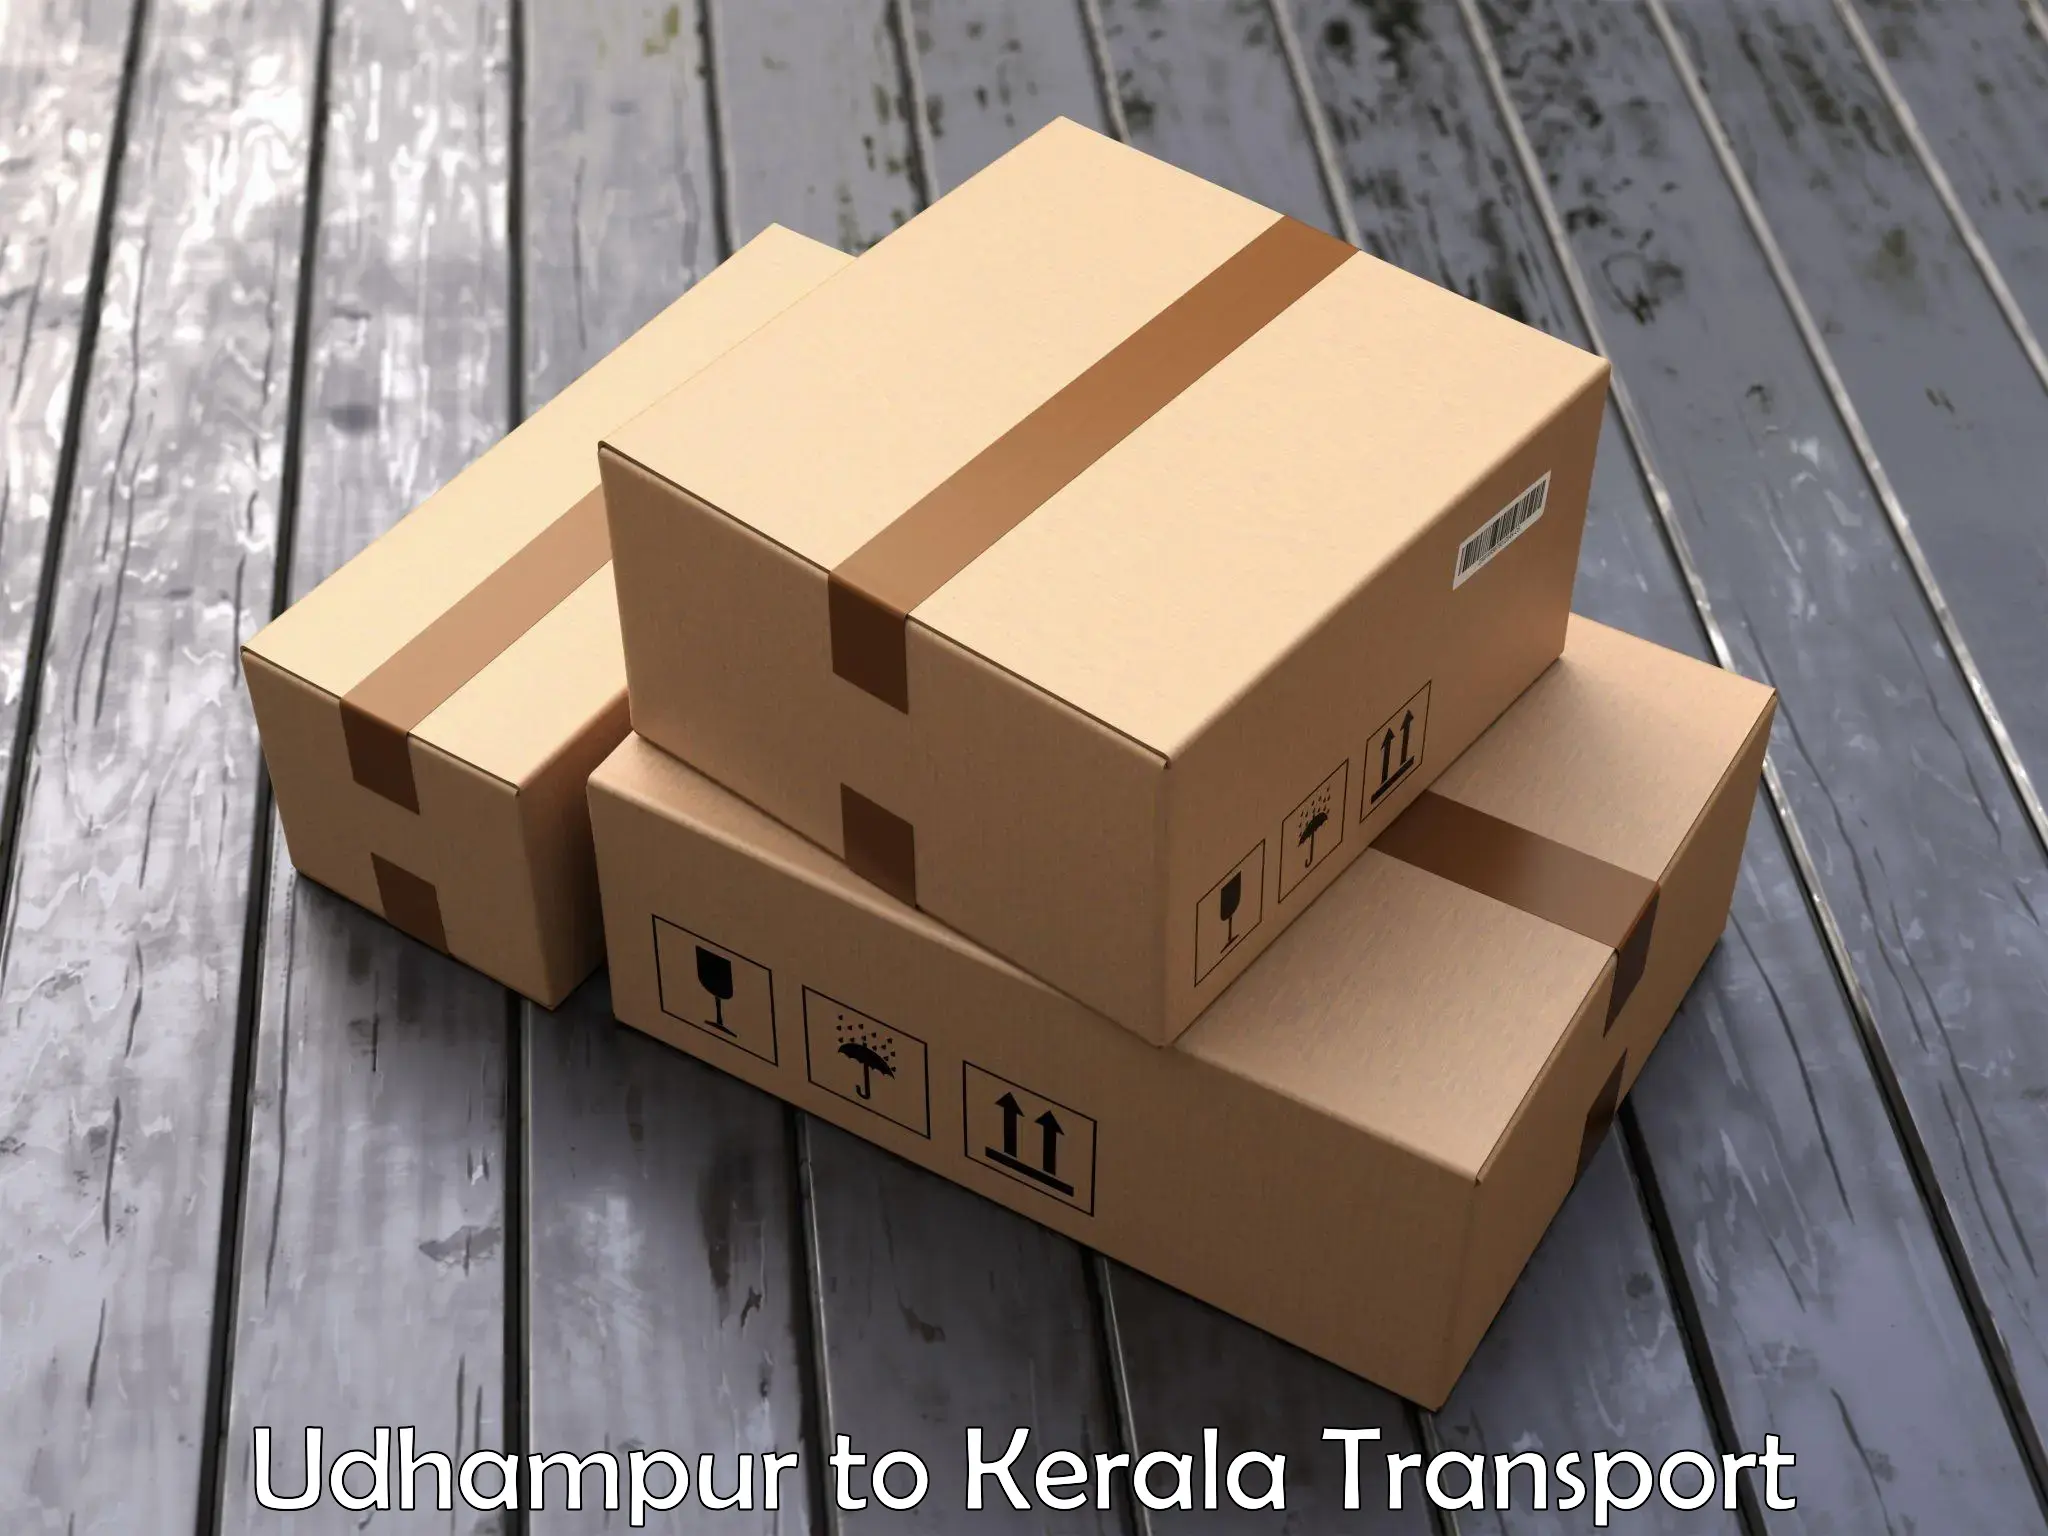 Air freight transport services Udhampur to Calicut